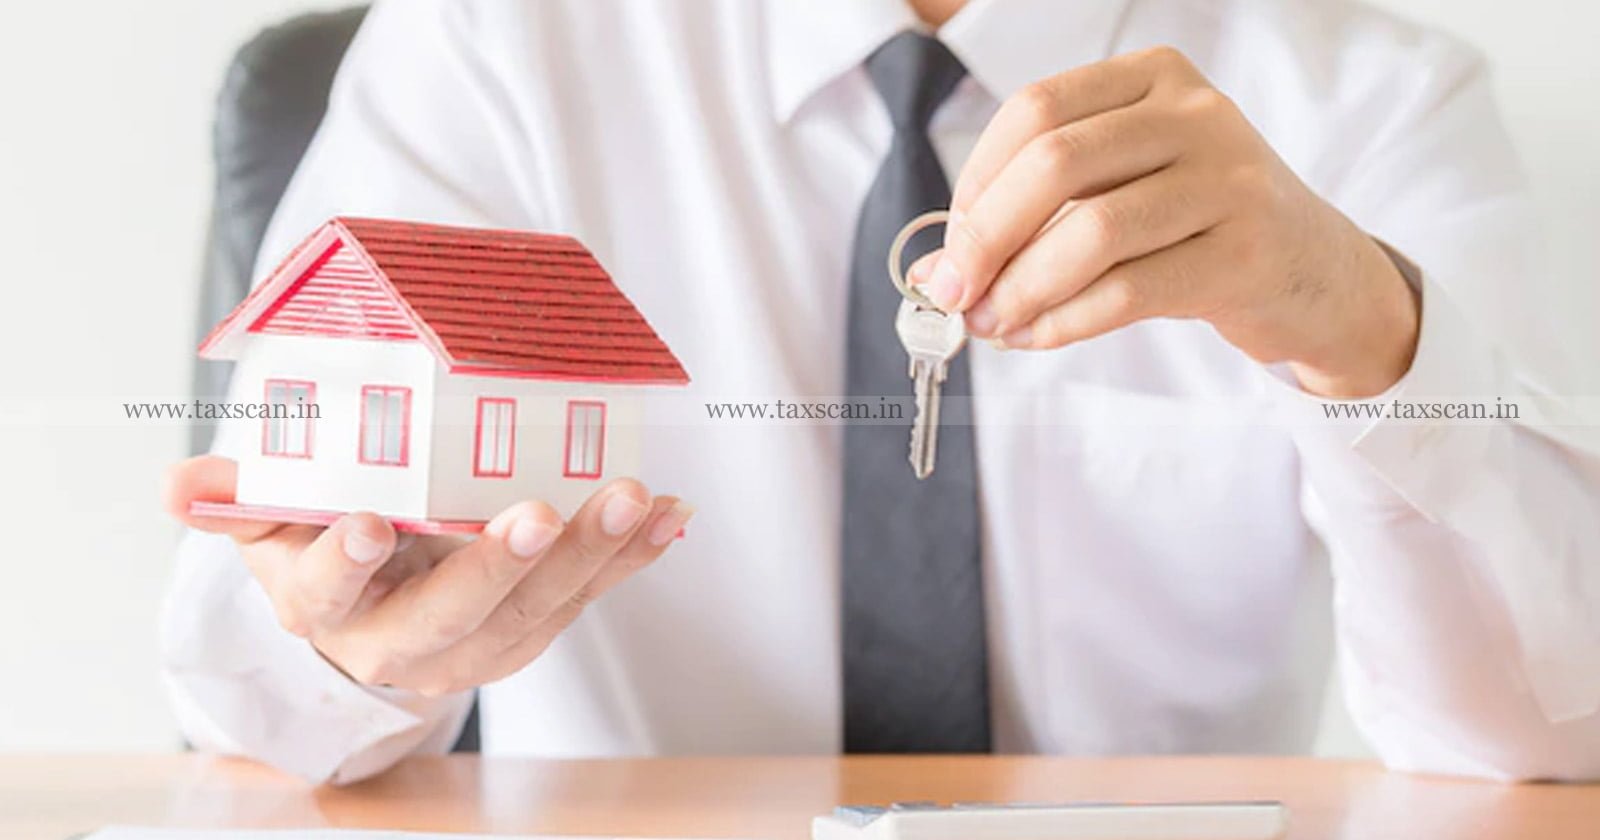 RCM - Service of Renting Residential Property - Odisha AAR - Renting Residential Property - Residential Property - Taxscan